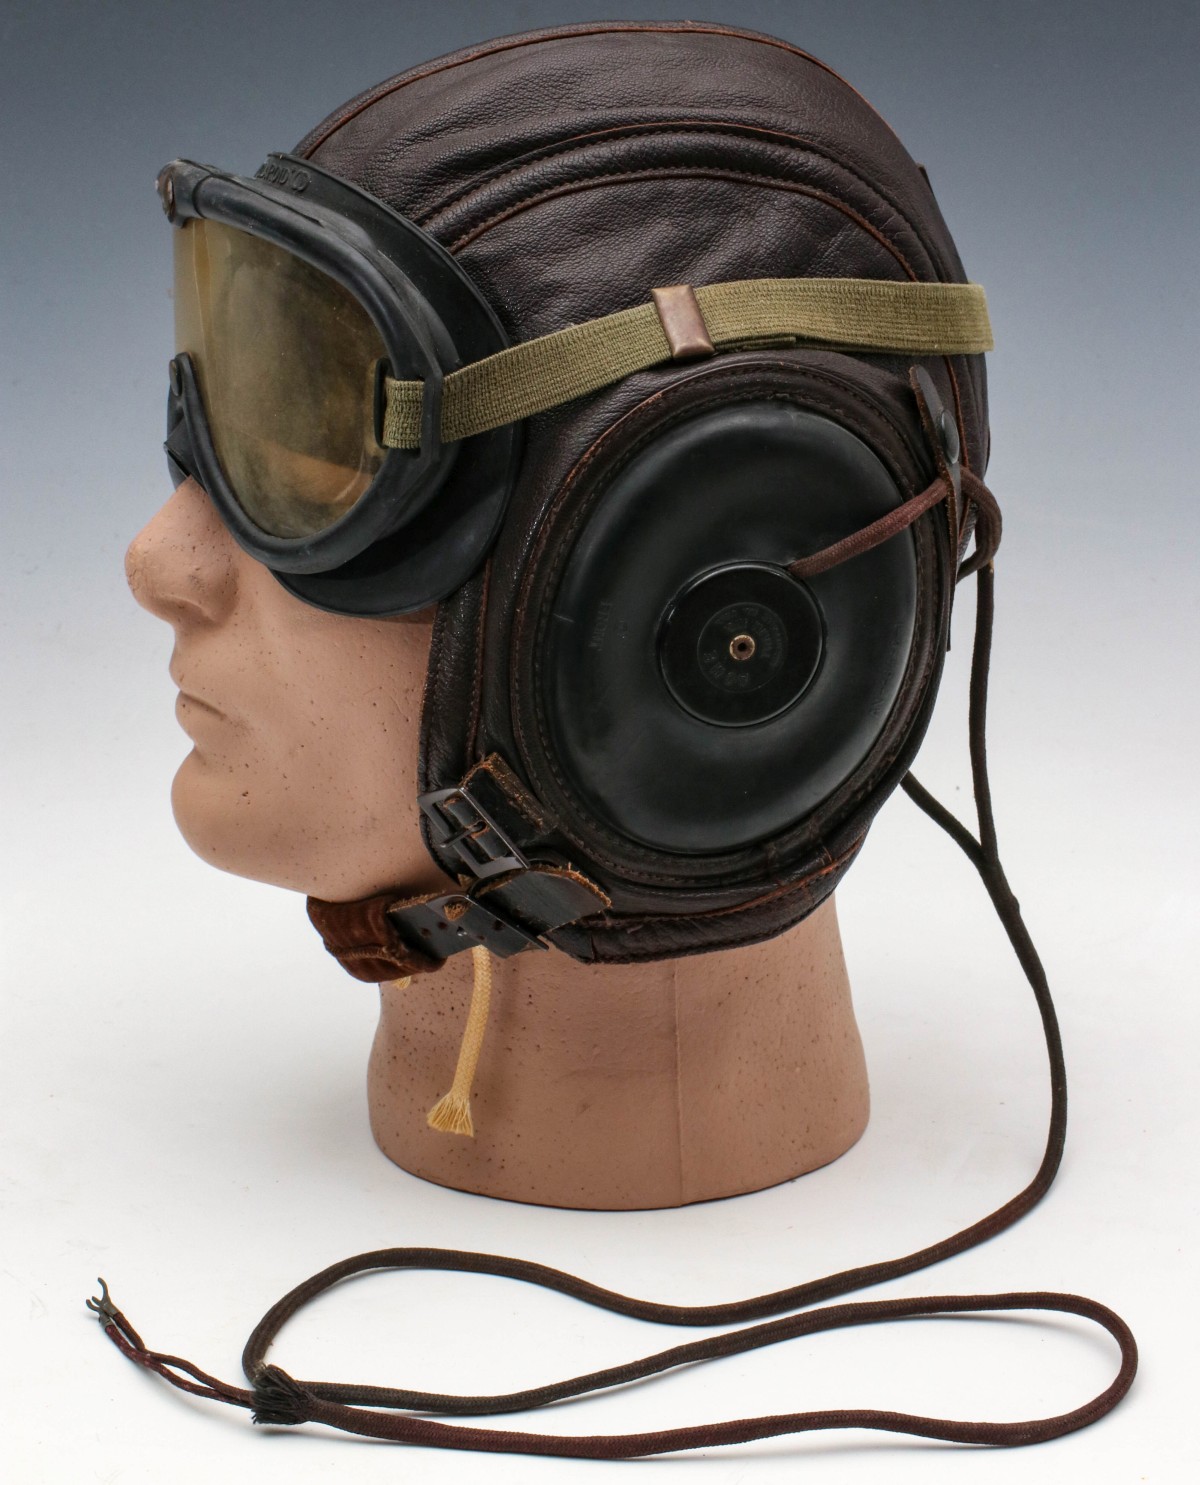 A WWII LEATHER FLIGHT HELMET WITH GOGGLES